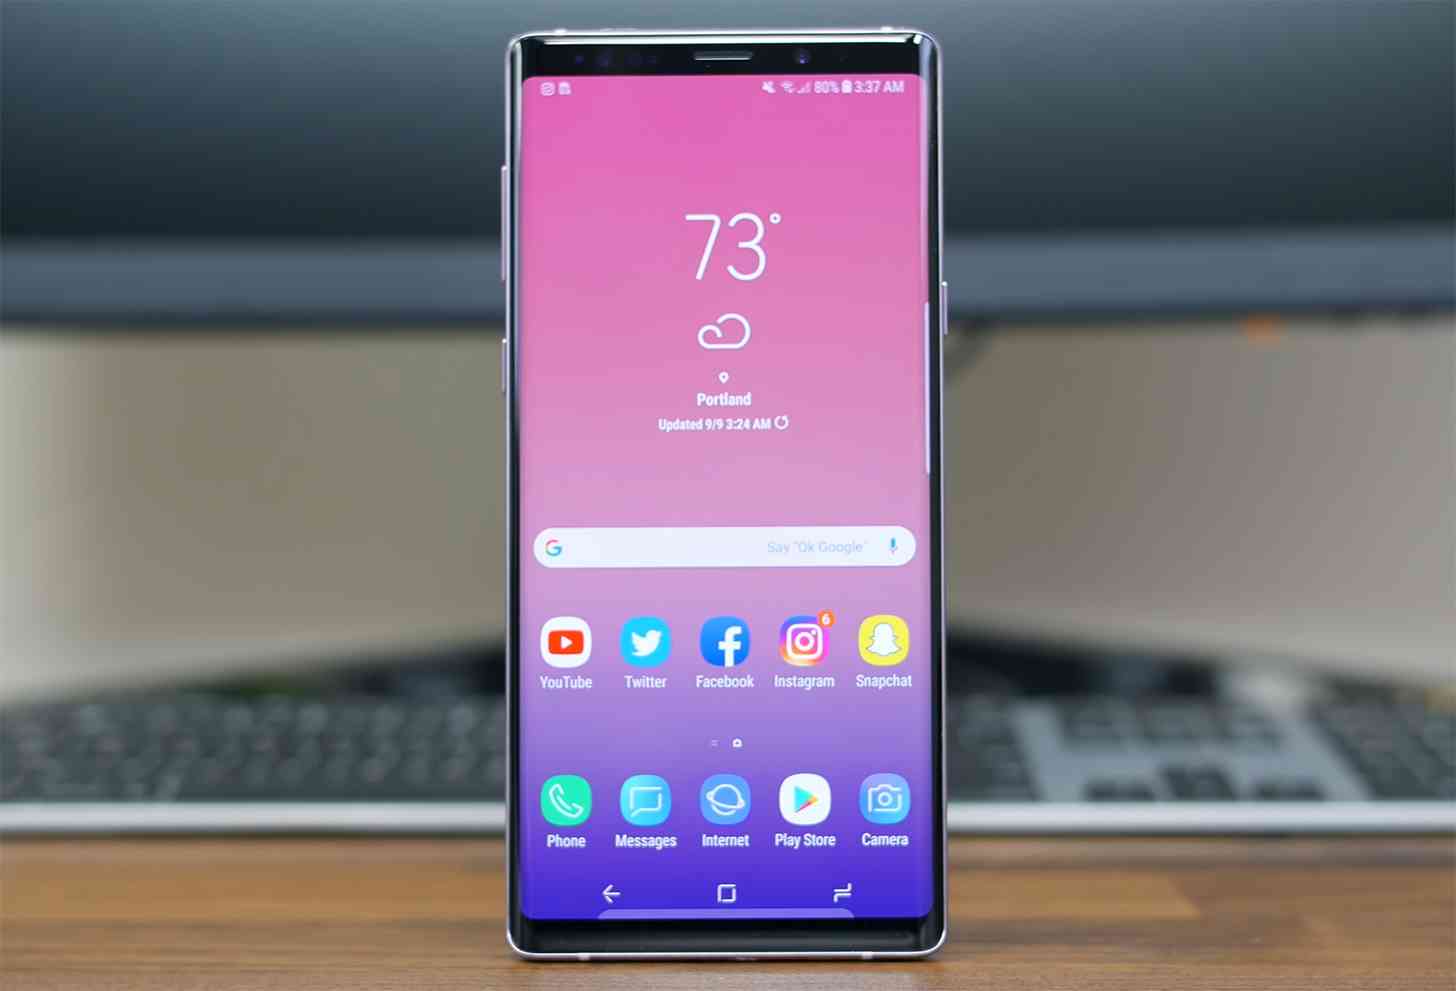 Samsung Galaxy S9, S9+, and Note 9 get early Black Friday discounts | PhoneDog